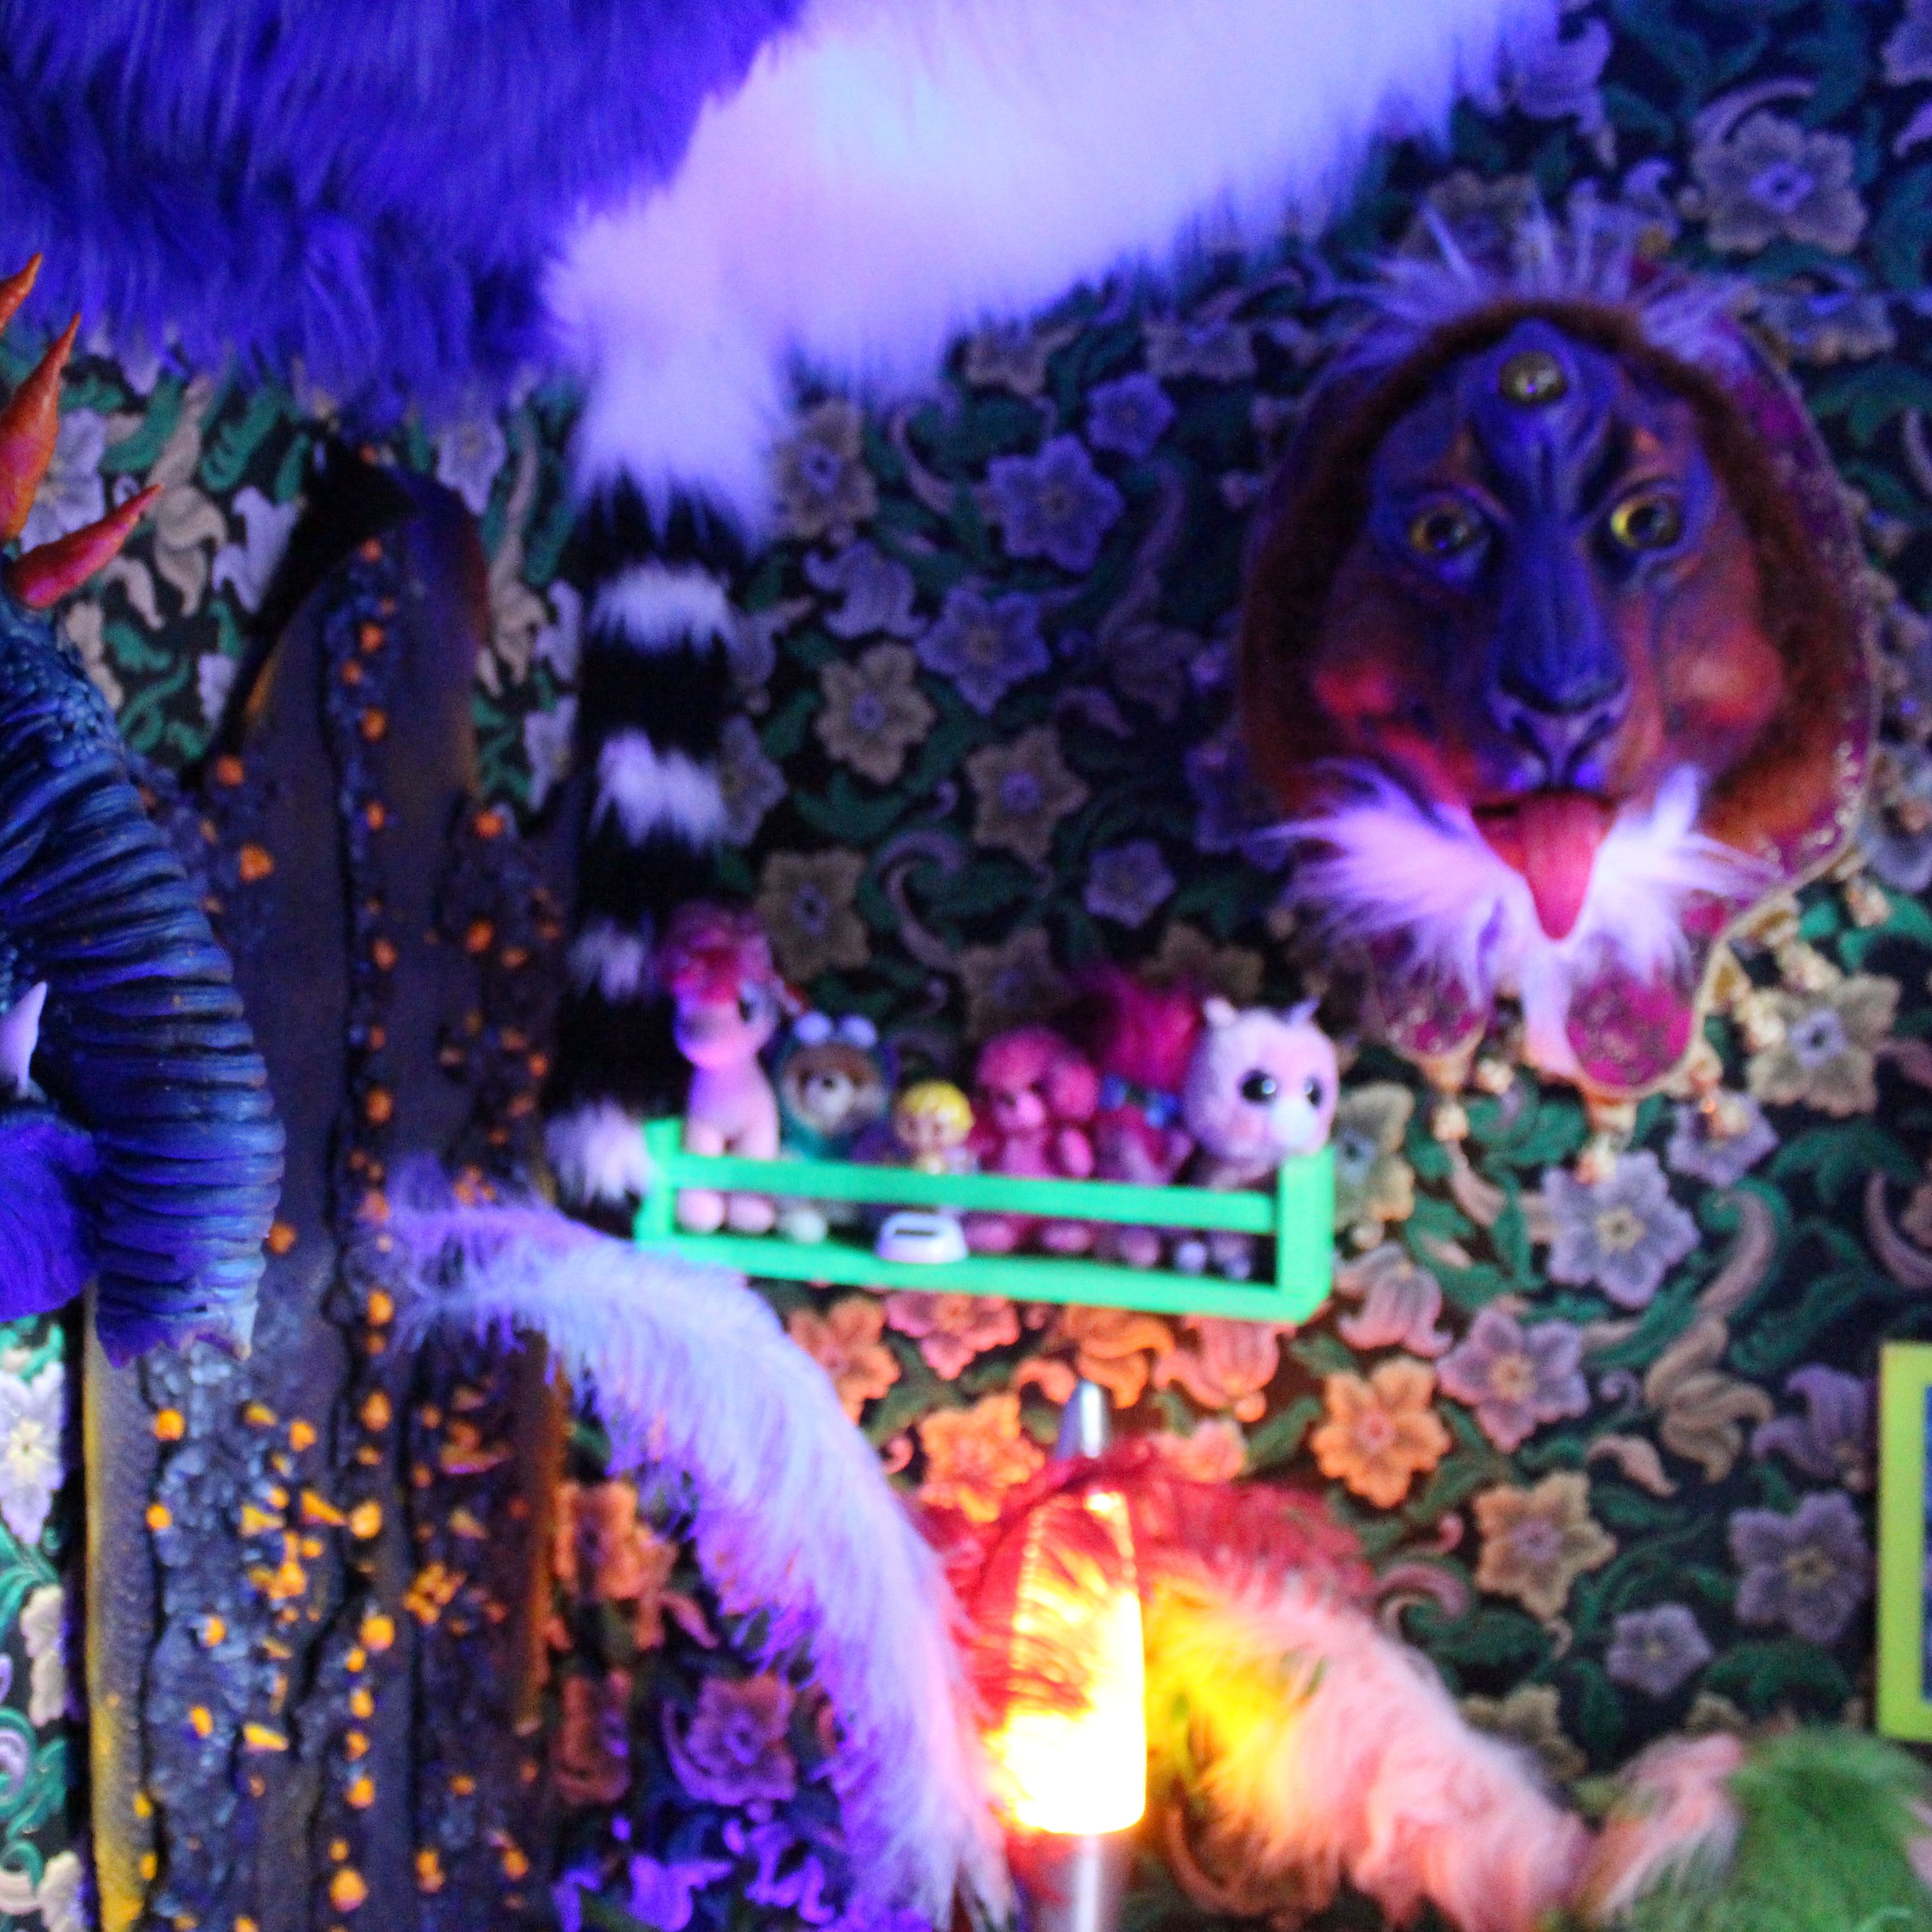 Fantastical bedroom decor full of colour, soft toys and beast-like mounted heads